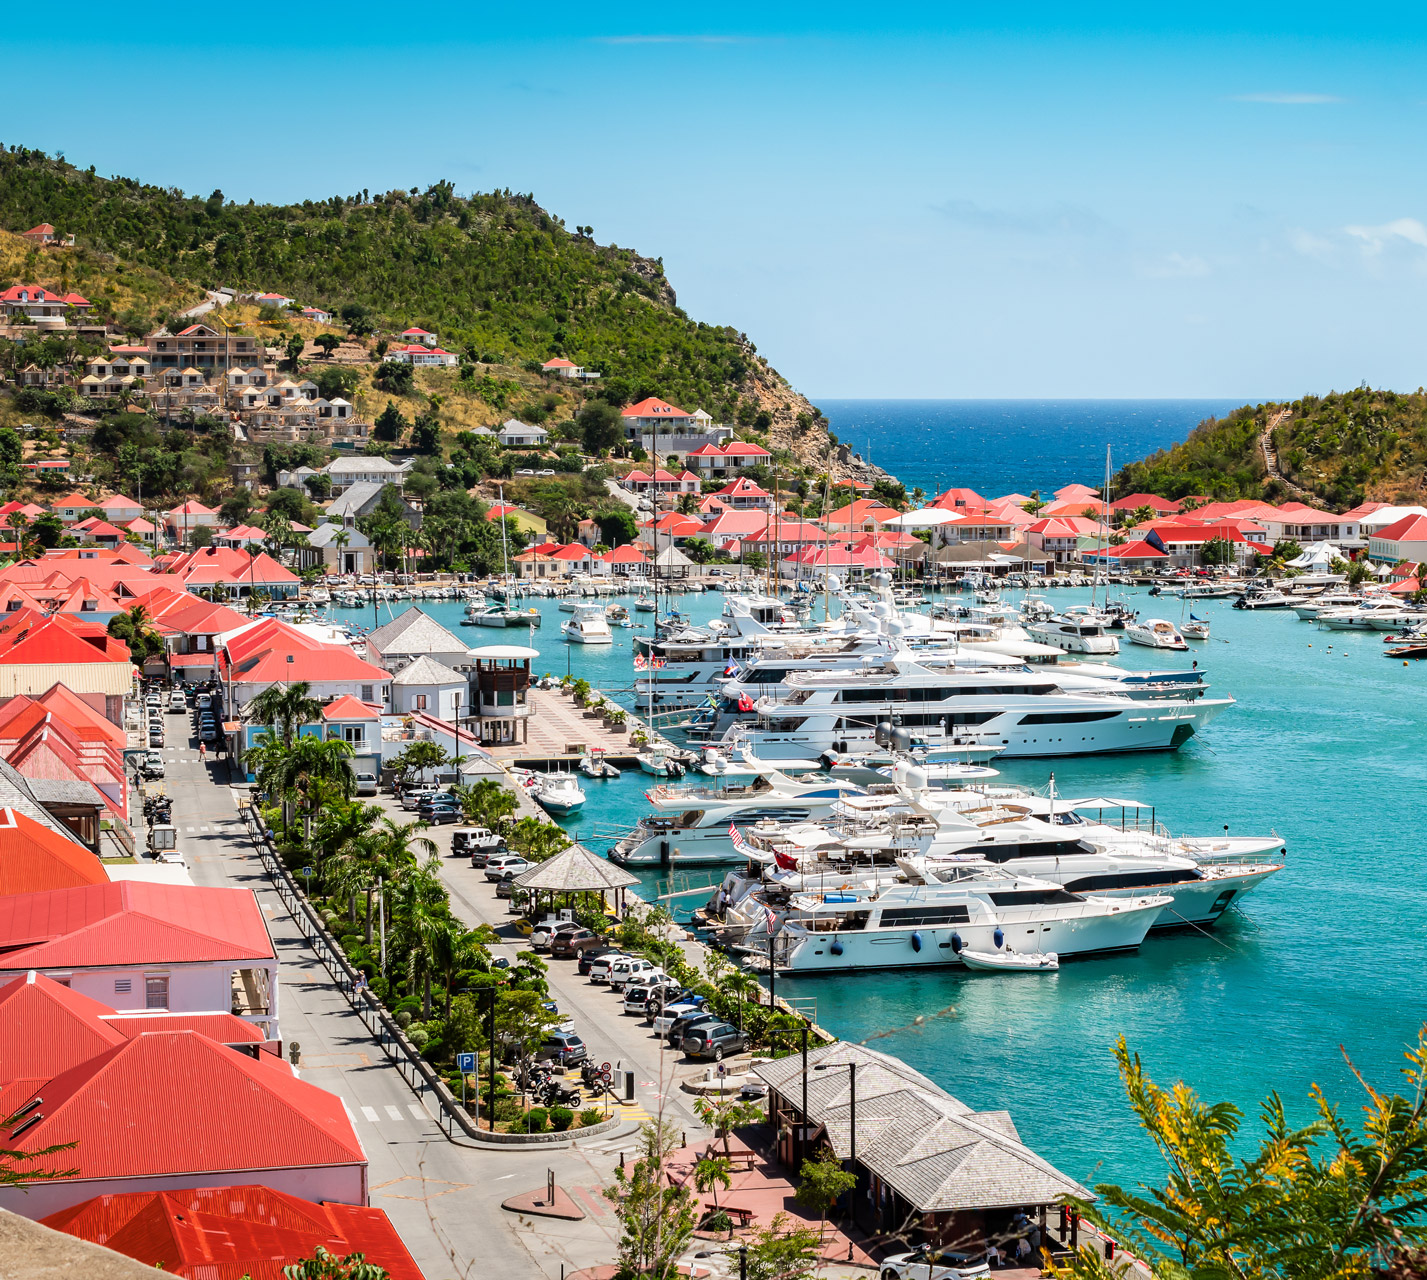 shipyard in st barts on a clear day surrounded by buildings with red roofs